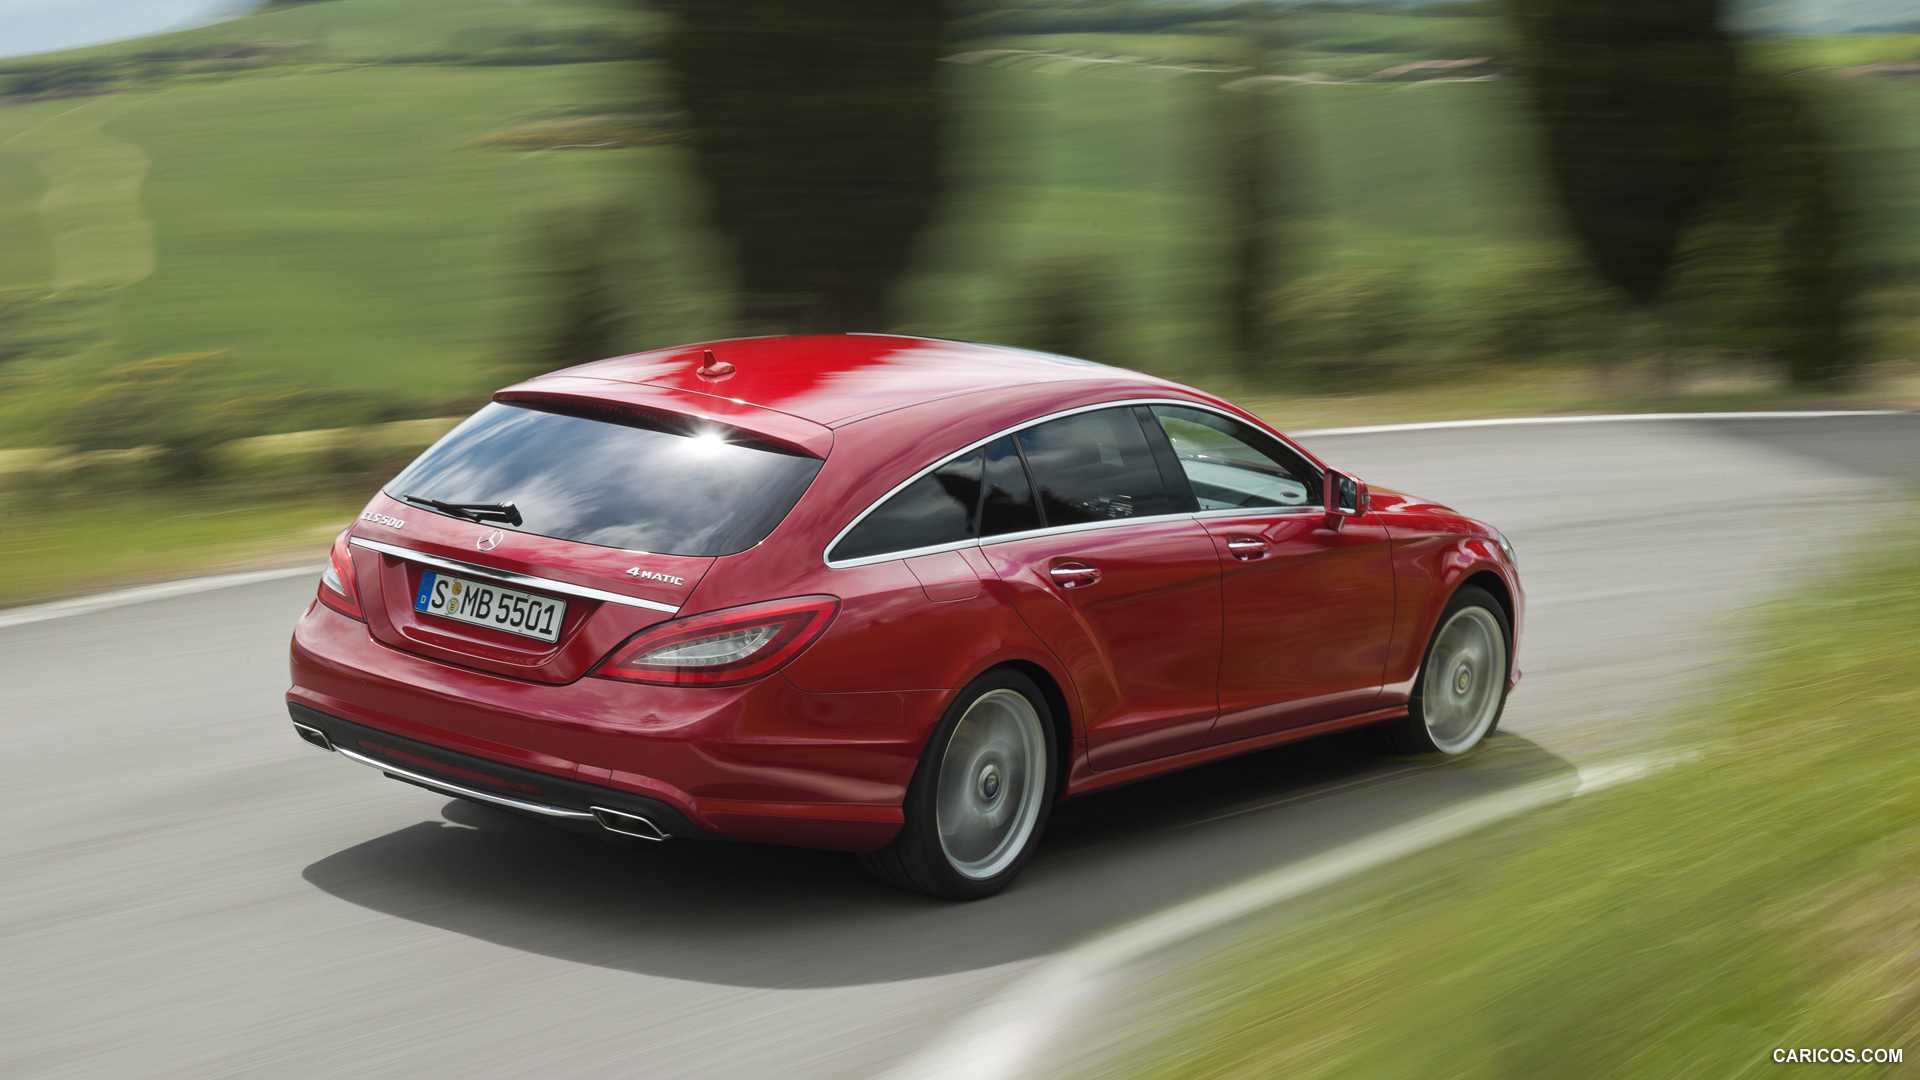 2013 Mercedes-Benz CLS 500 4MATIC Shooting Brake - Rear, #12 of 184